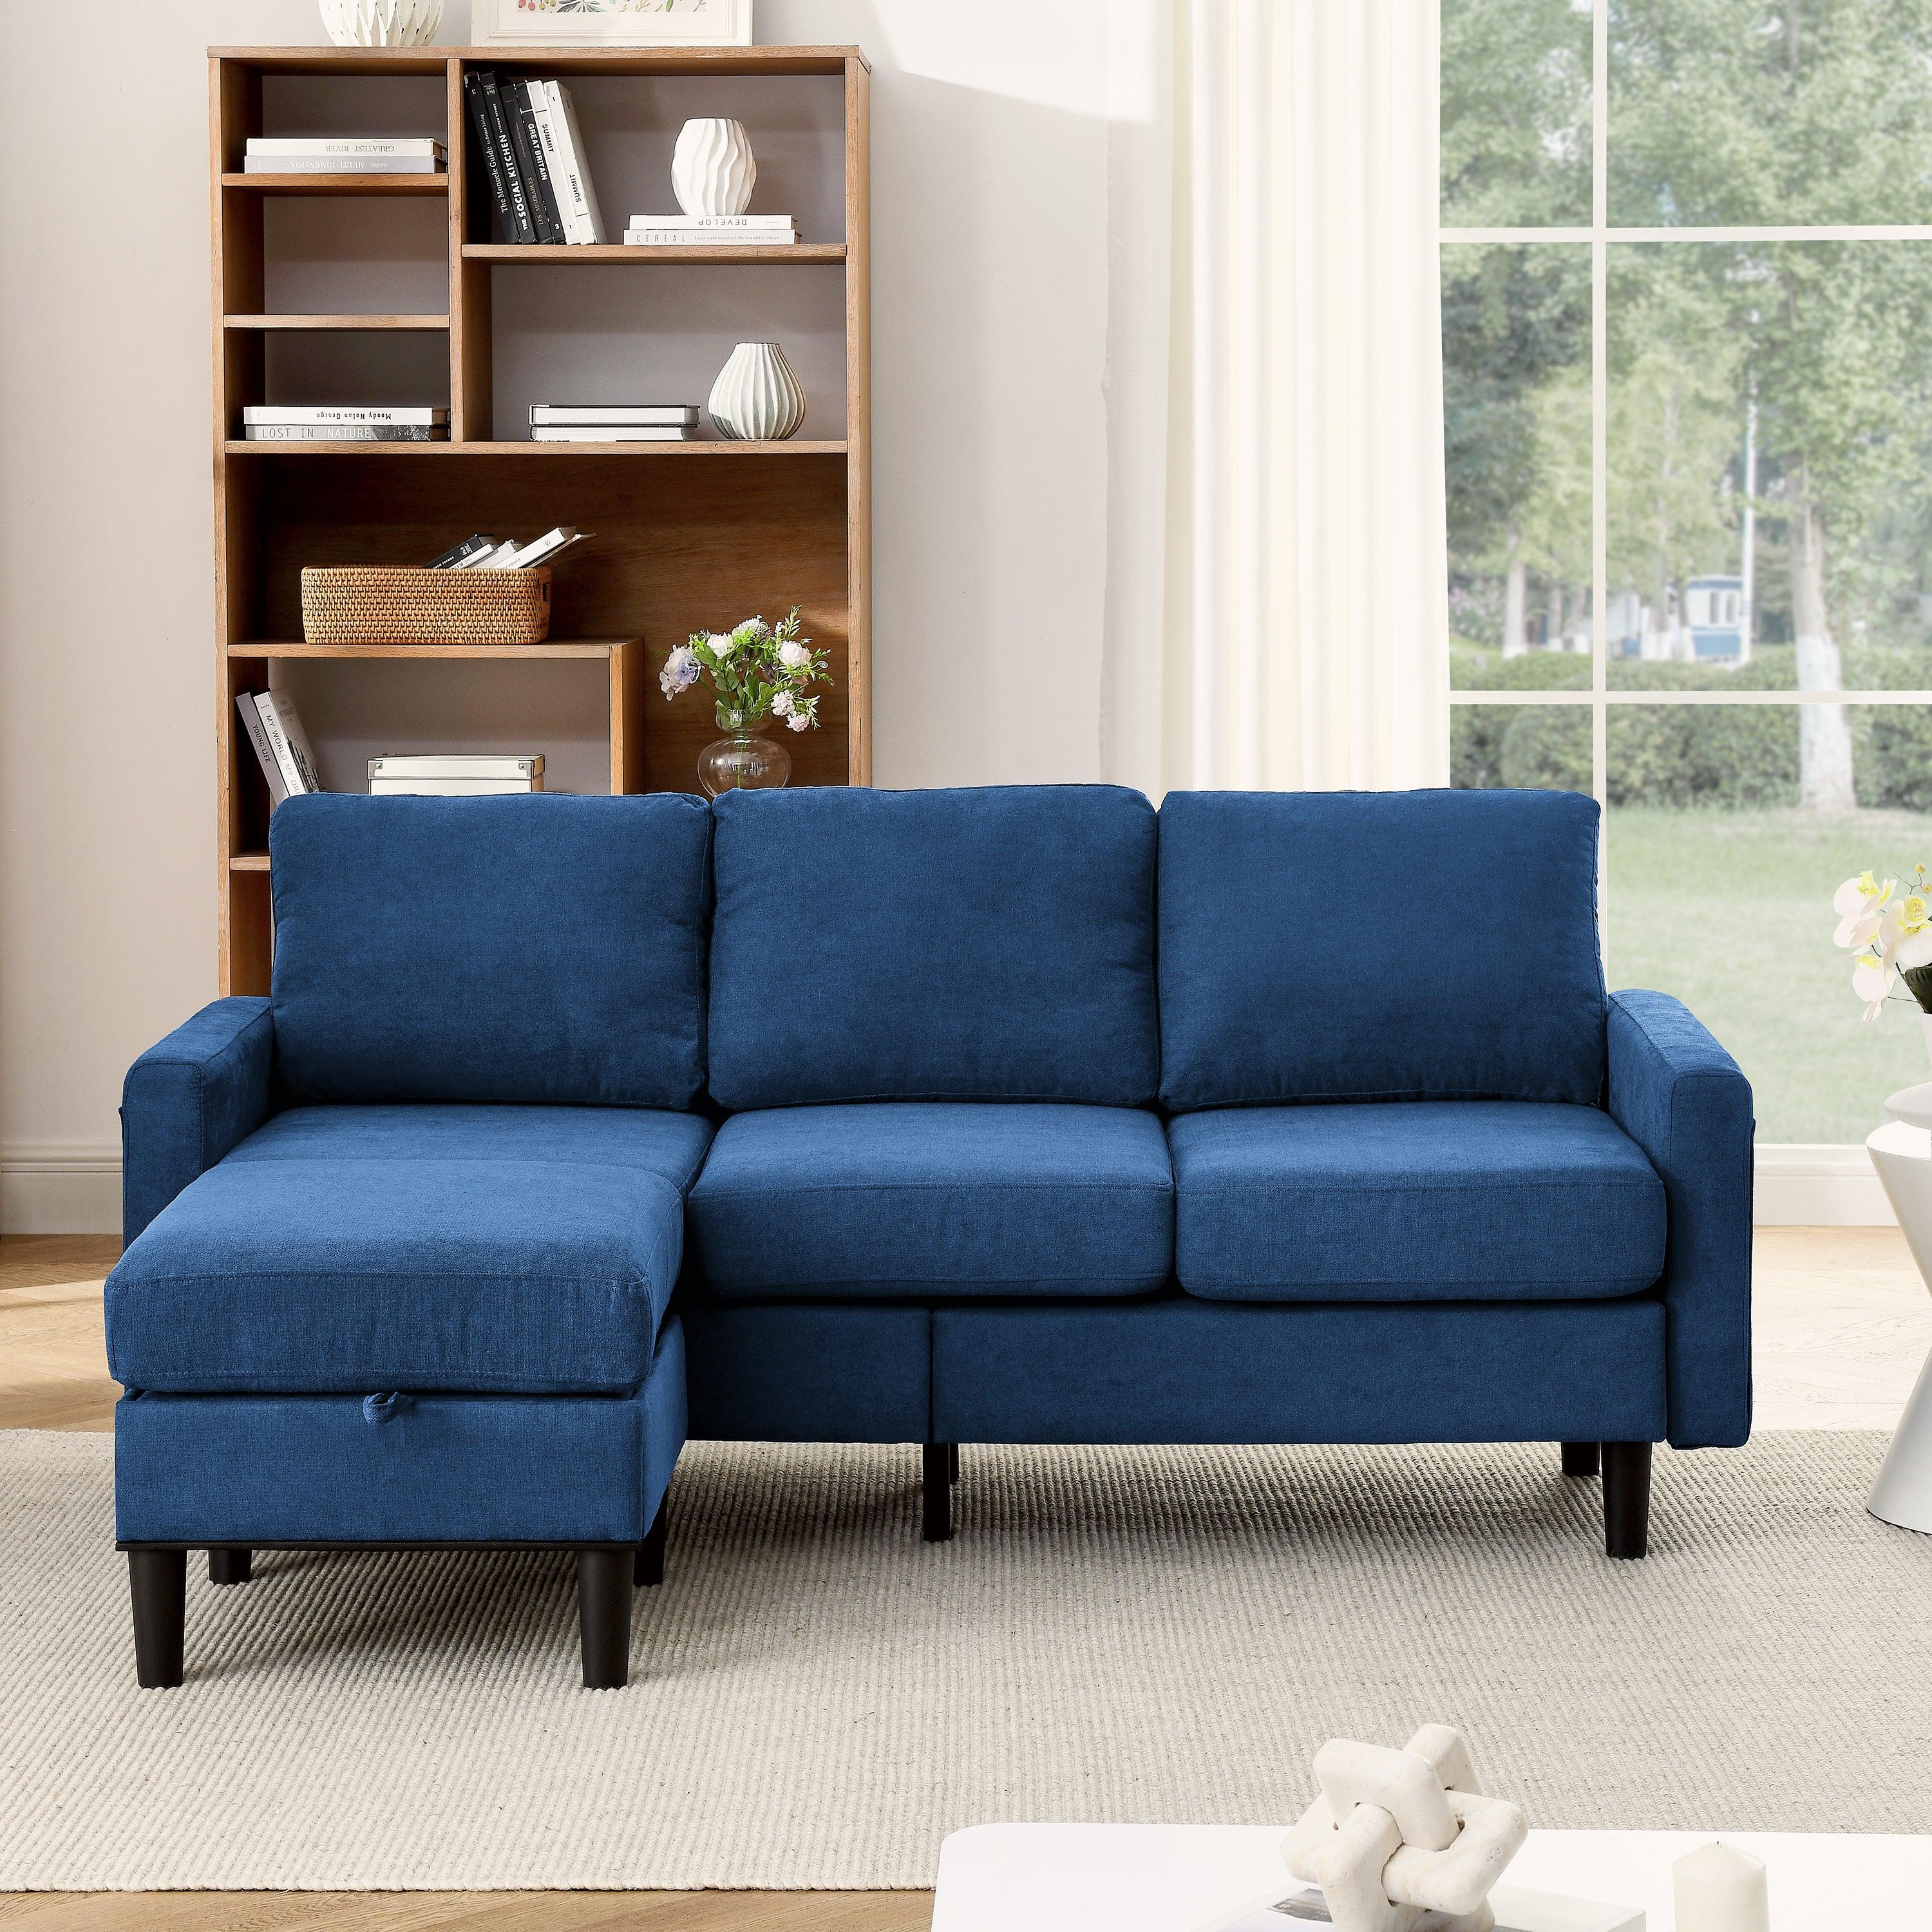 🆓🚛 Upholstered Sectional Sofa Couch, L Shaped Couch With Storage Reversible Ottoman Bench 3 Seater for Living Room, Apartment, Compact Spaces, Fabric Navy Blue